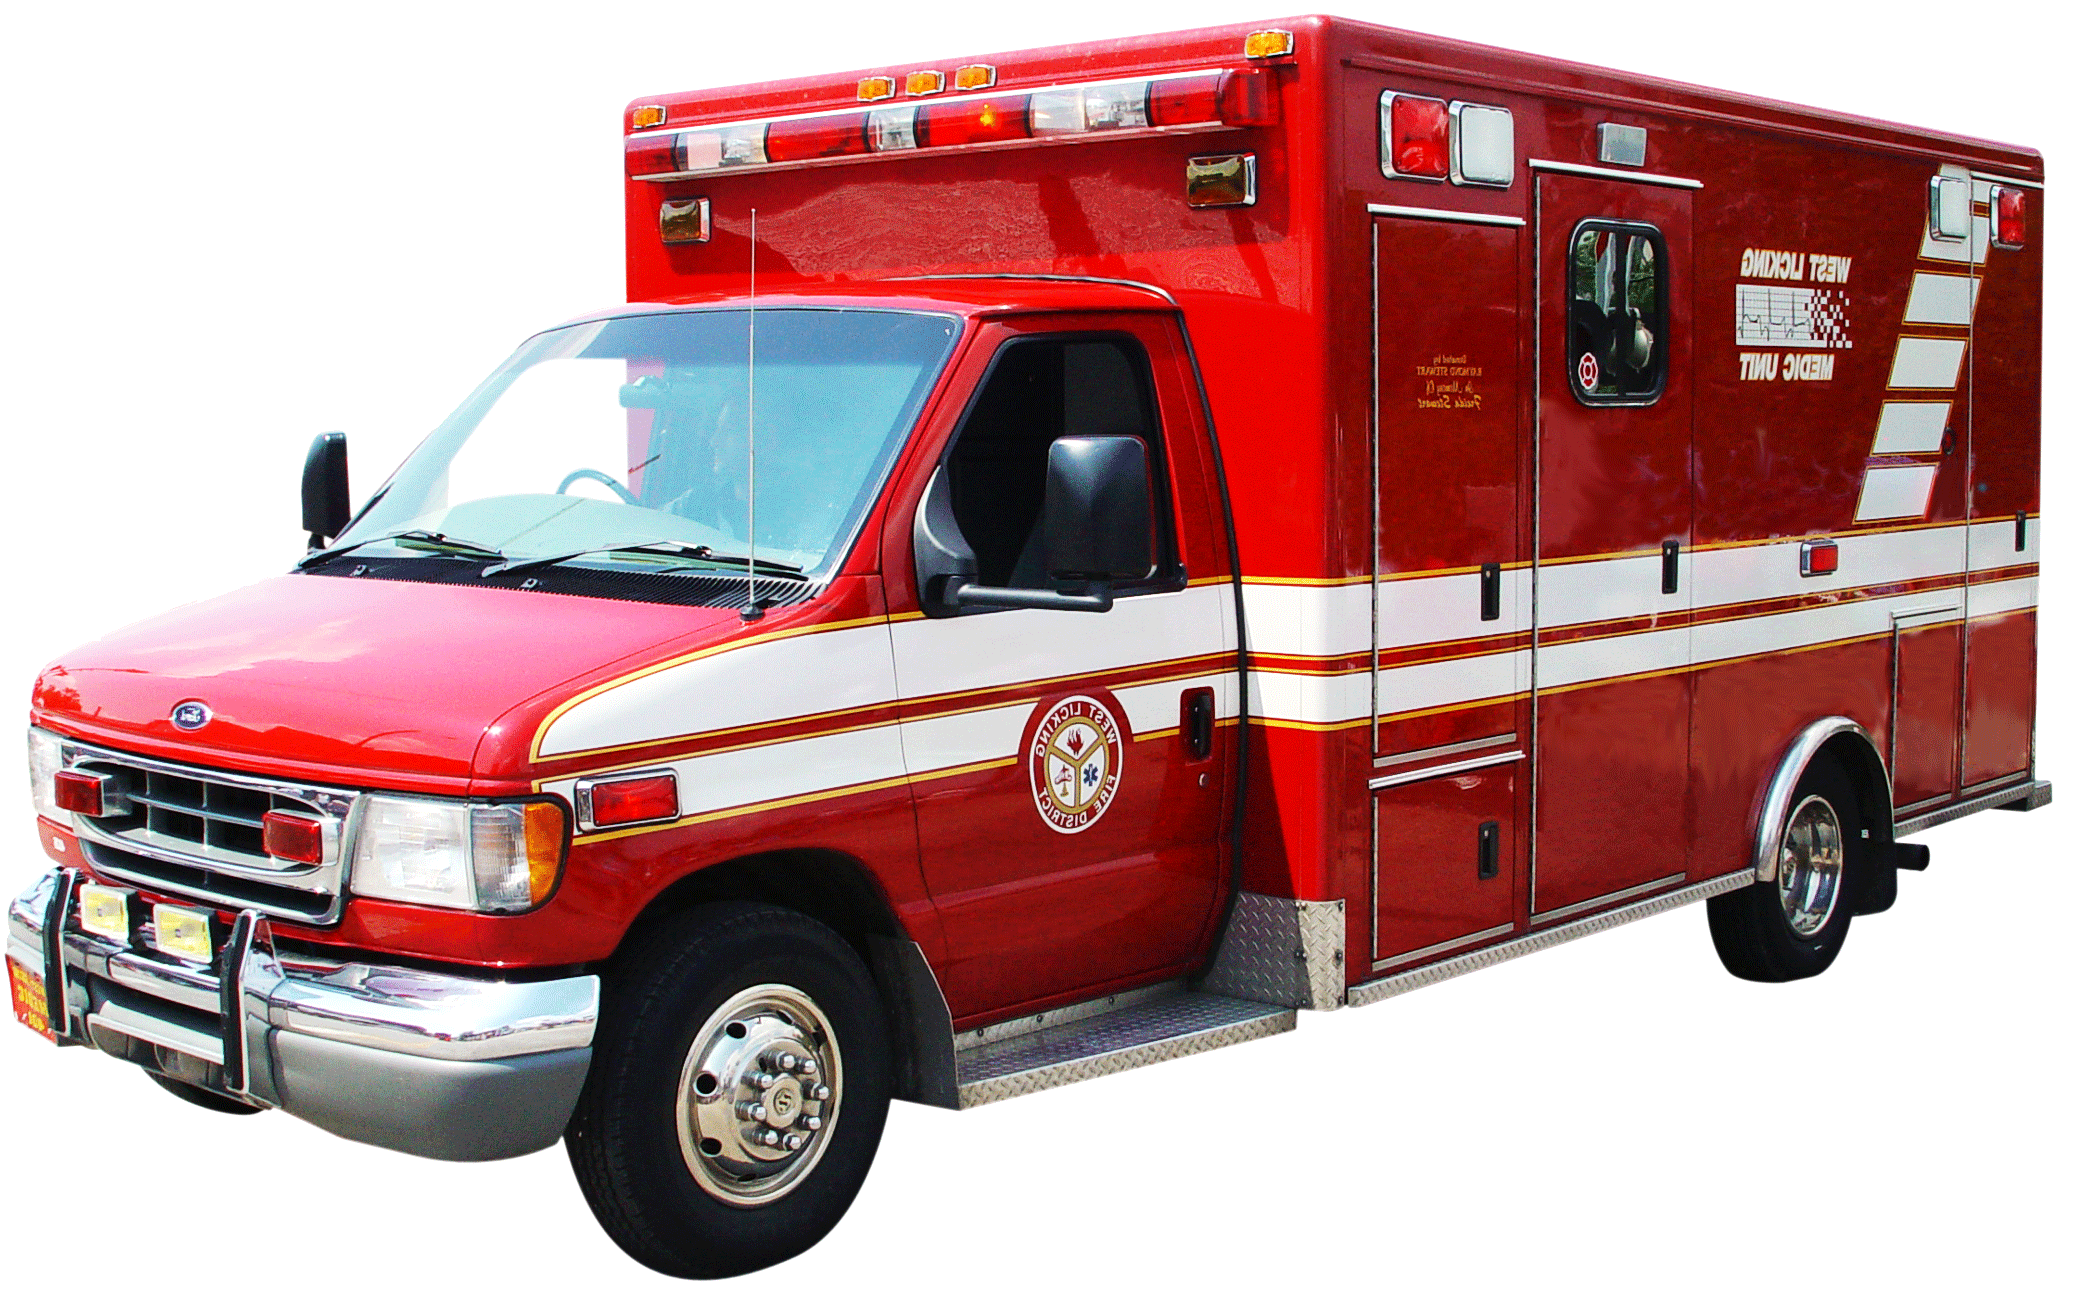 Ambulance Icon Clipart - Emergency Medical Services (2100x1321)